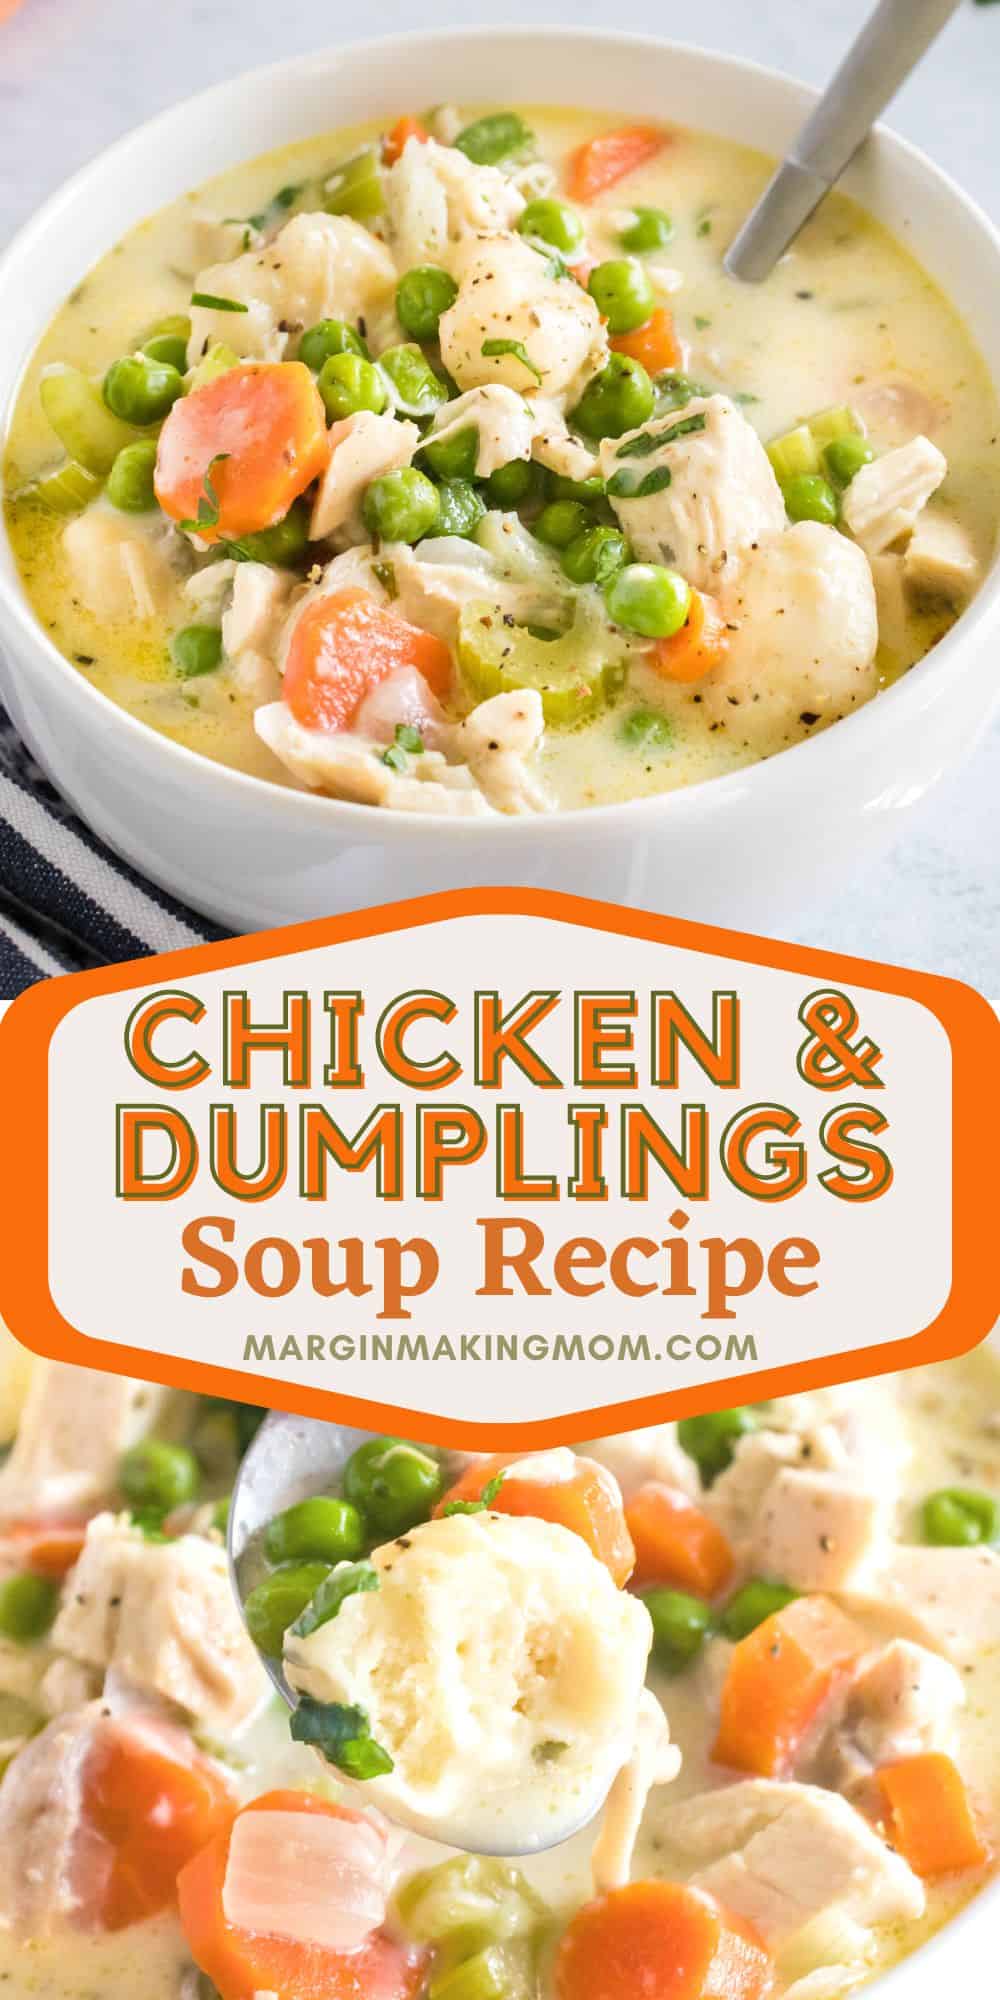 two photos; one shows a bowl of chicken and dumplings soup, the other shows a spoon lifting out a dumpling from the bowl.